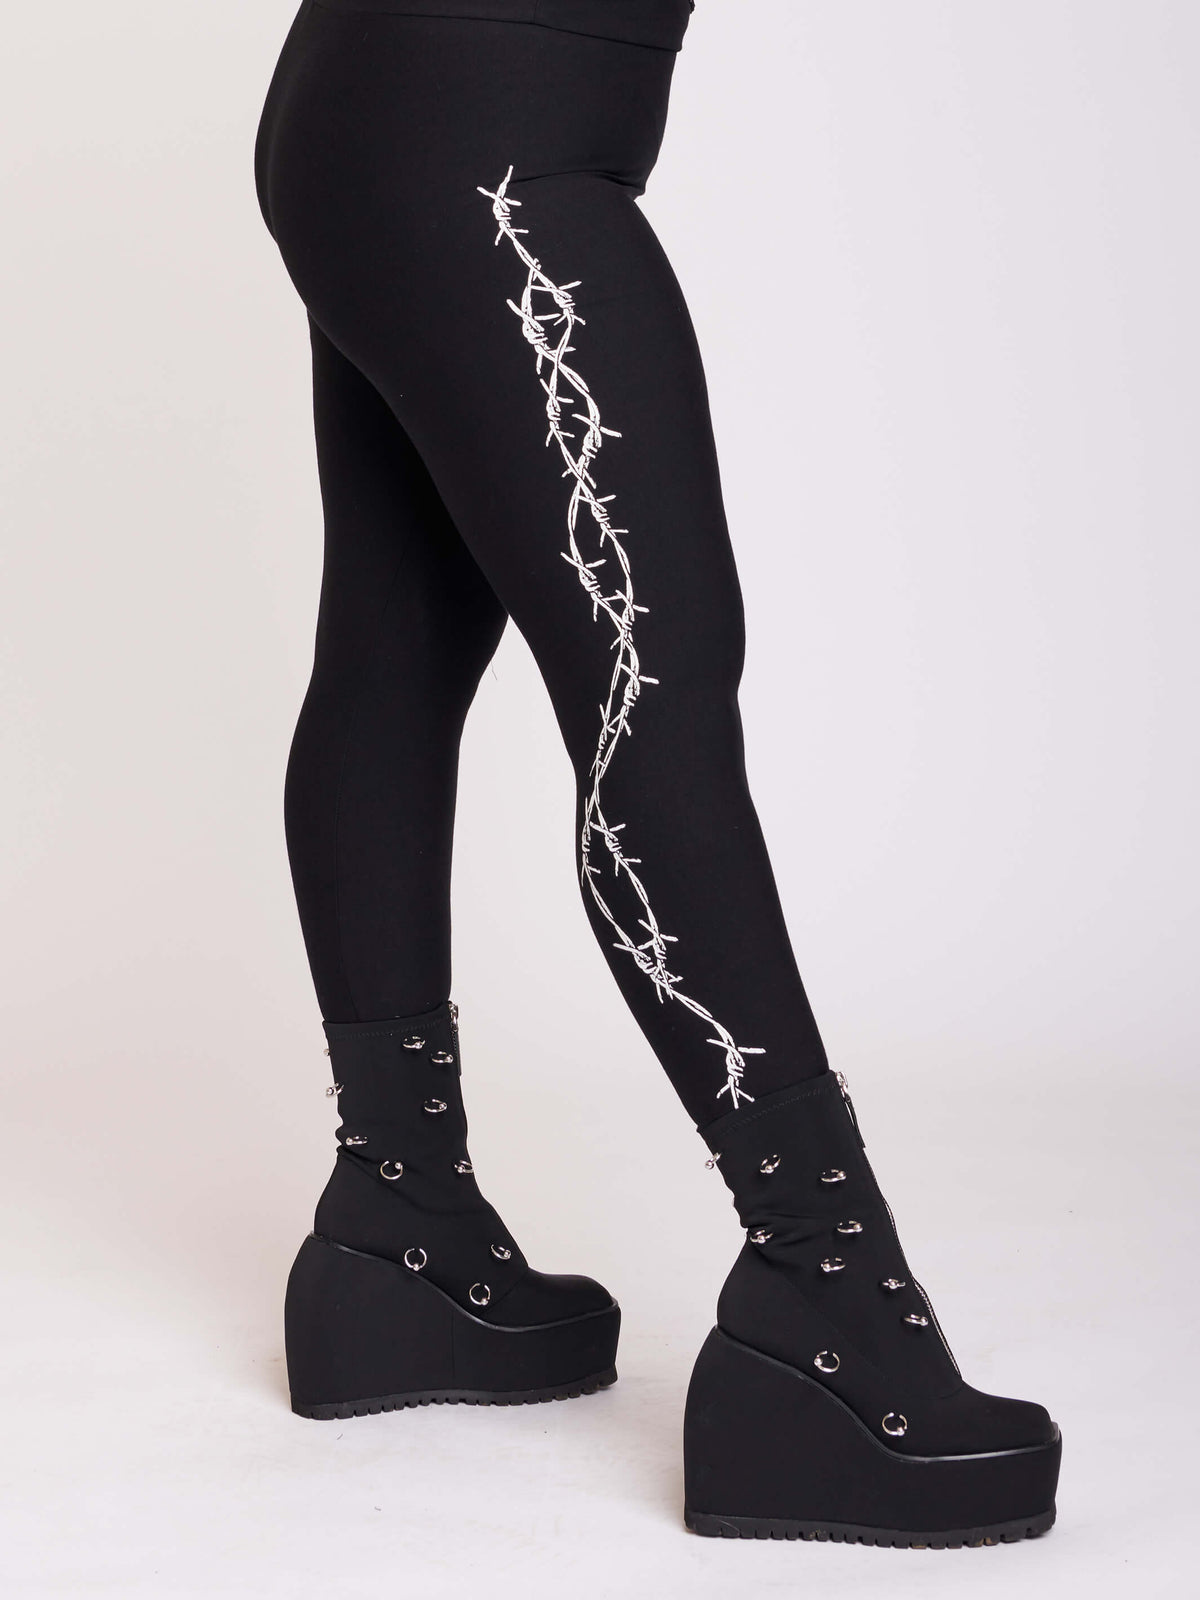 Black leggings with side bardbed wire graphic